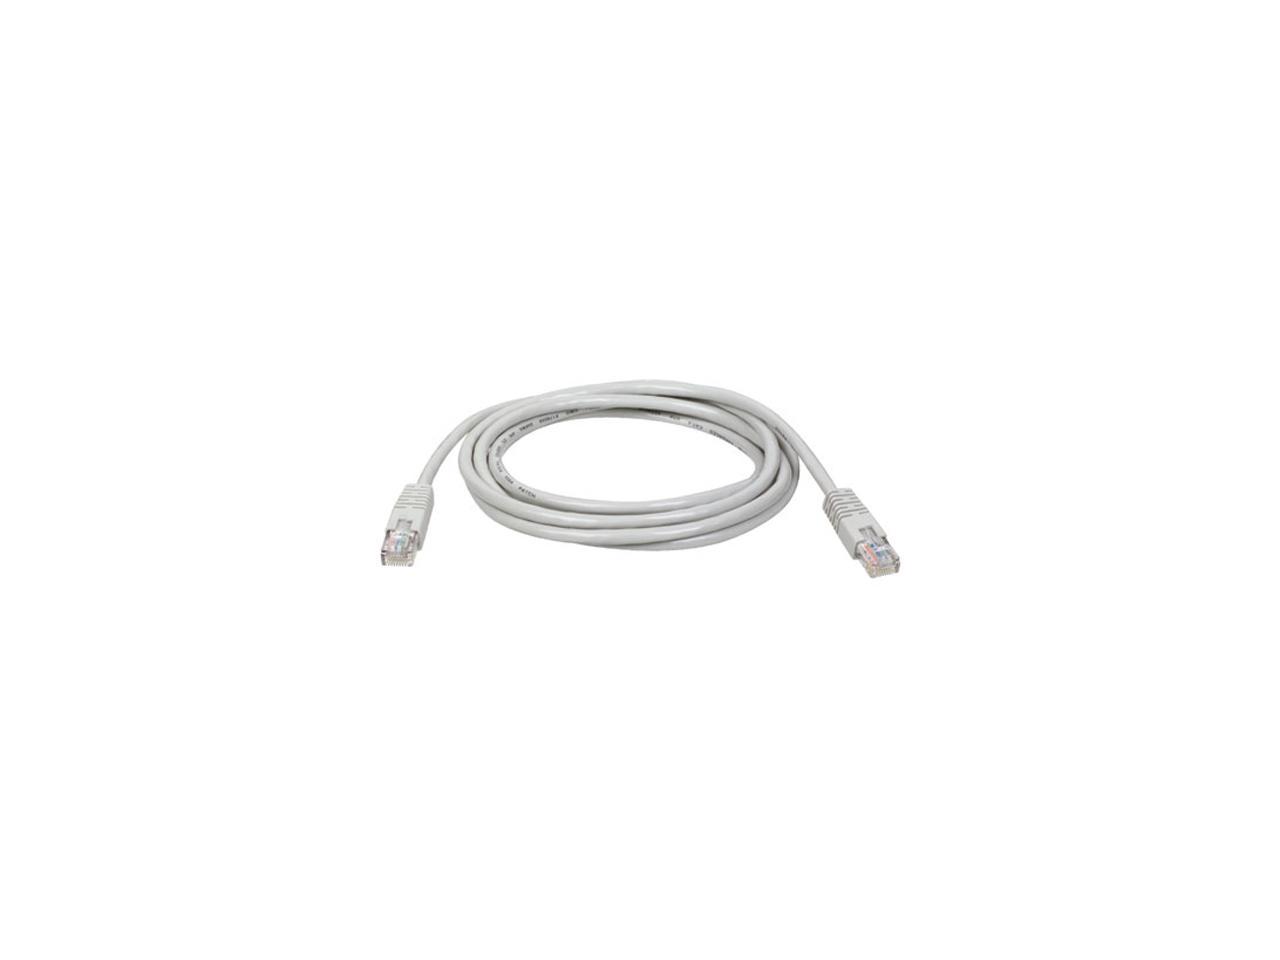 TRIPP LITE N002-007-GY 7 ft. Cat 5E Gray Network Cable